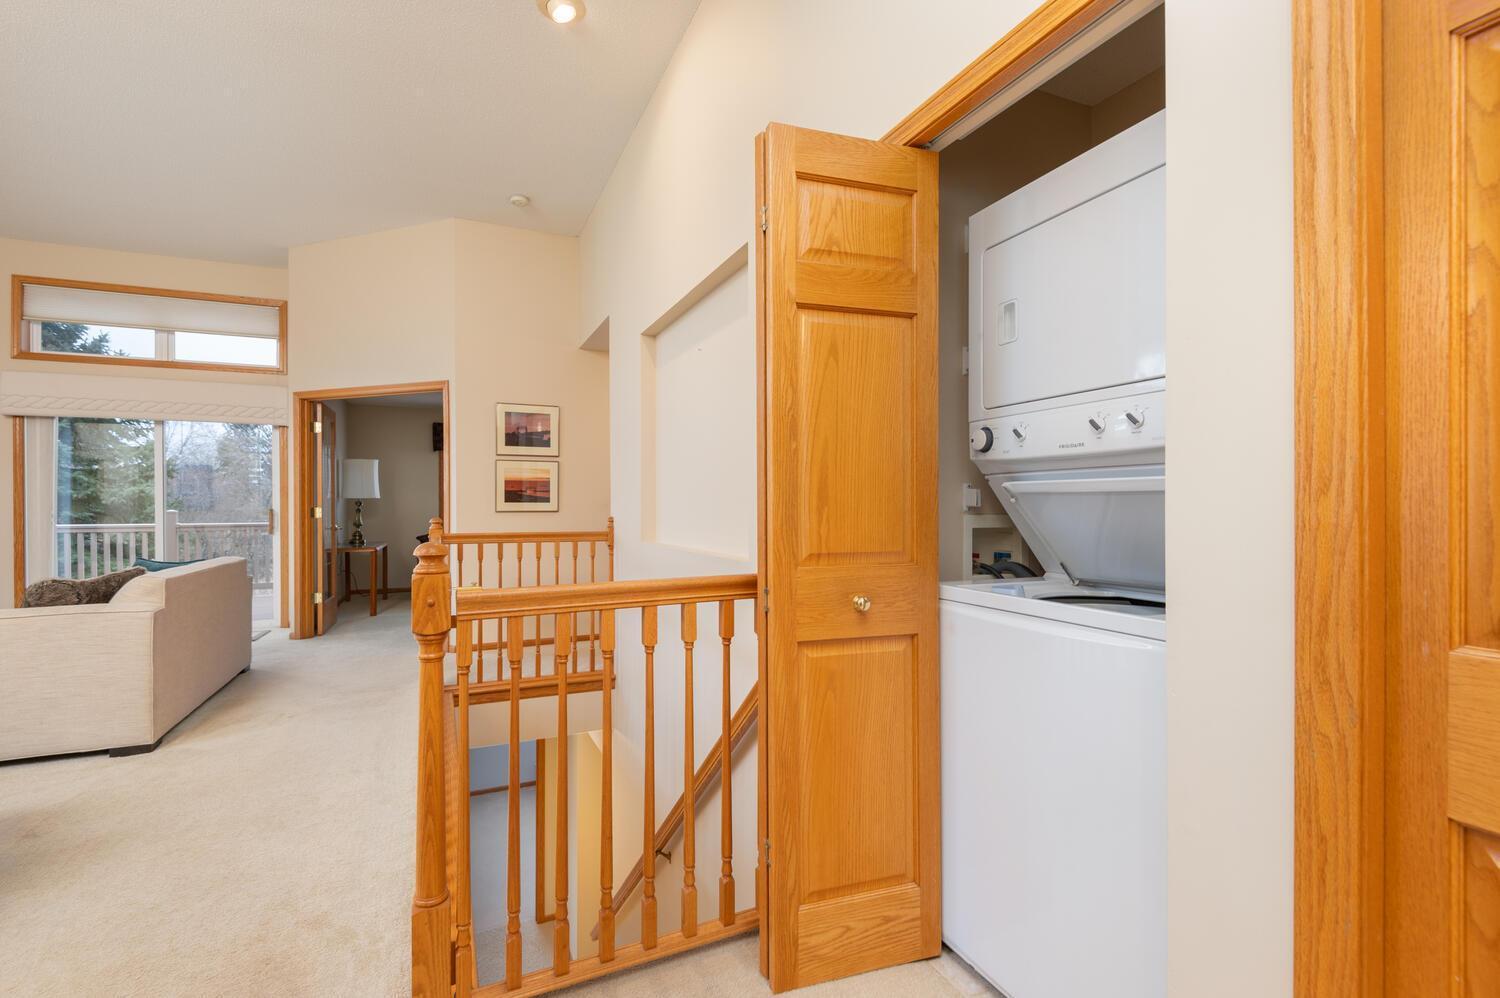 Handy main floor laundry closet with a stacked washer and dryer. Plus a lower level laundry room with full size units.